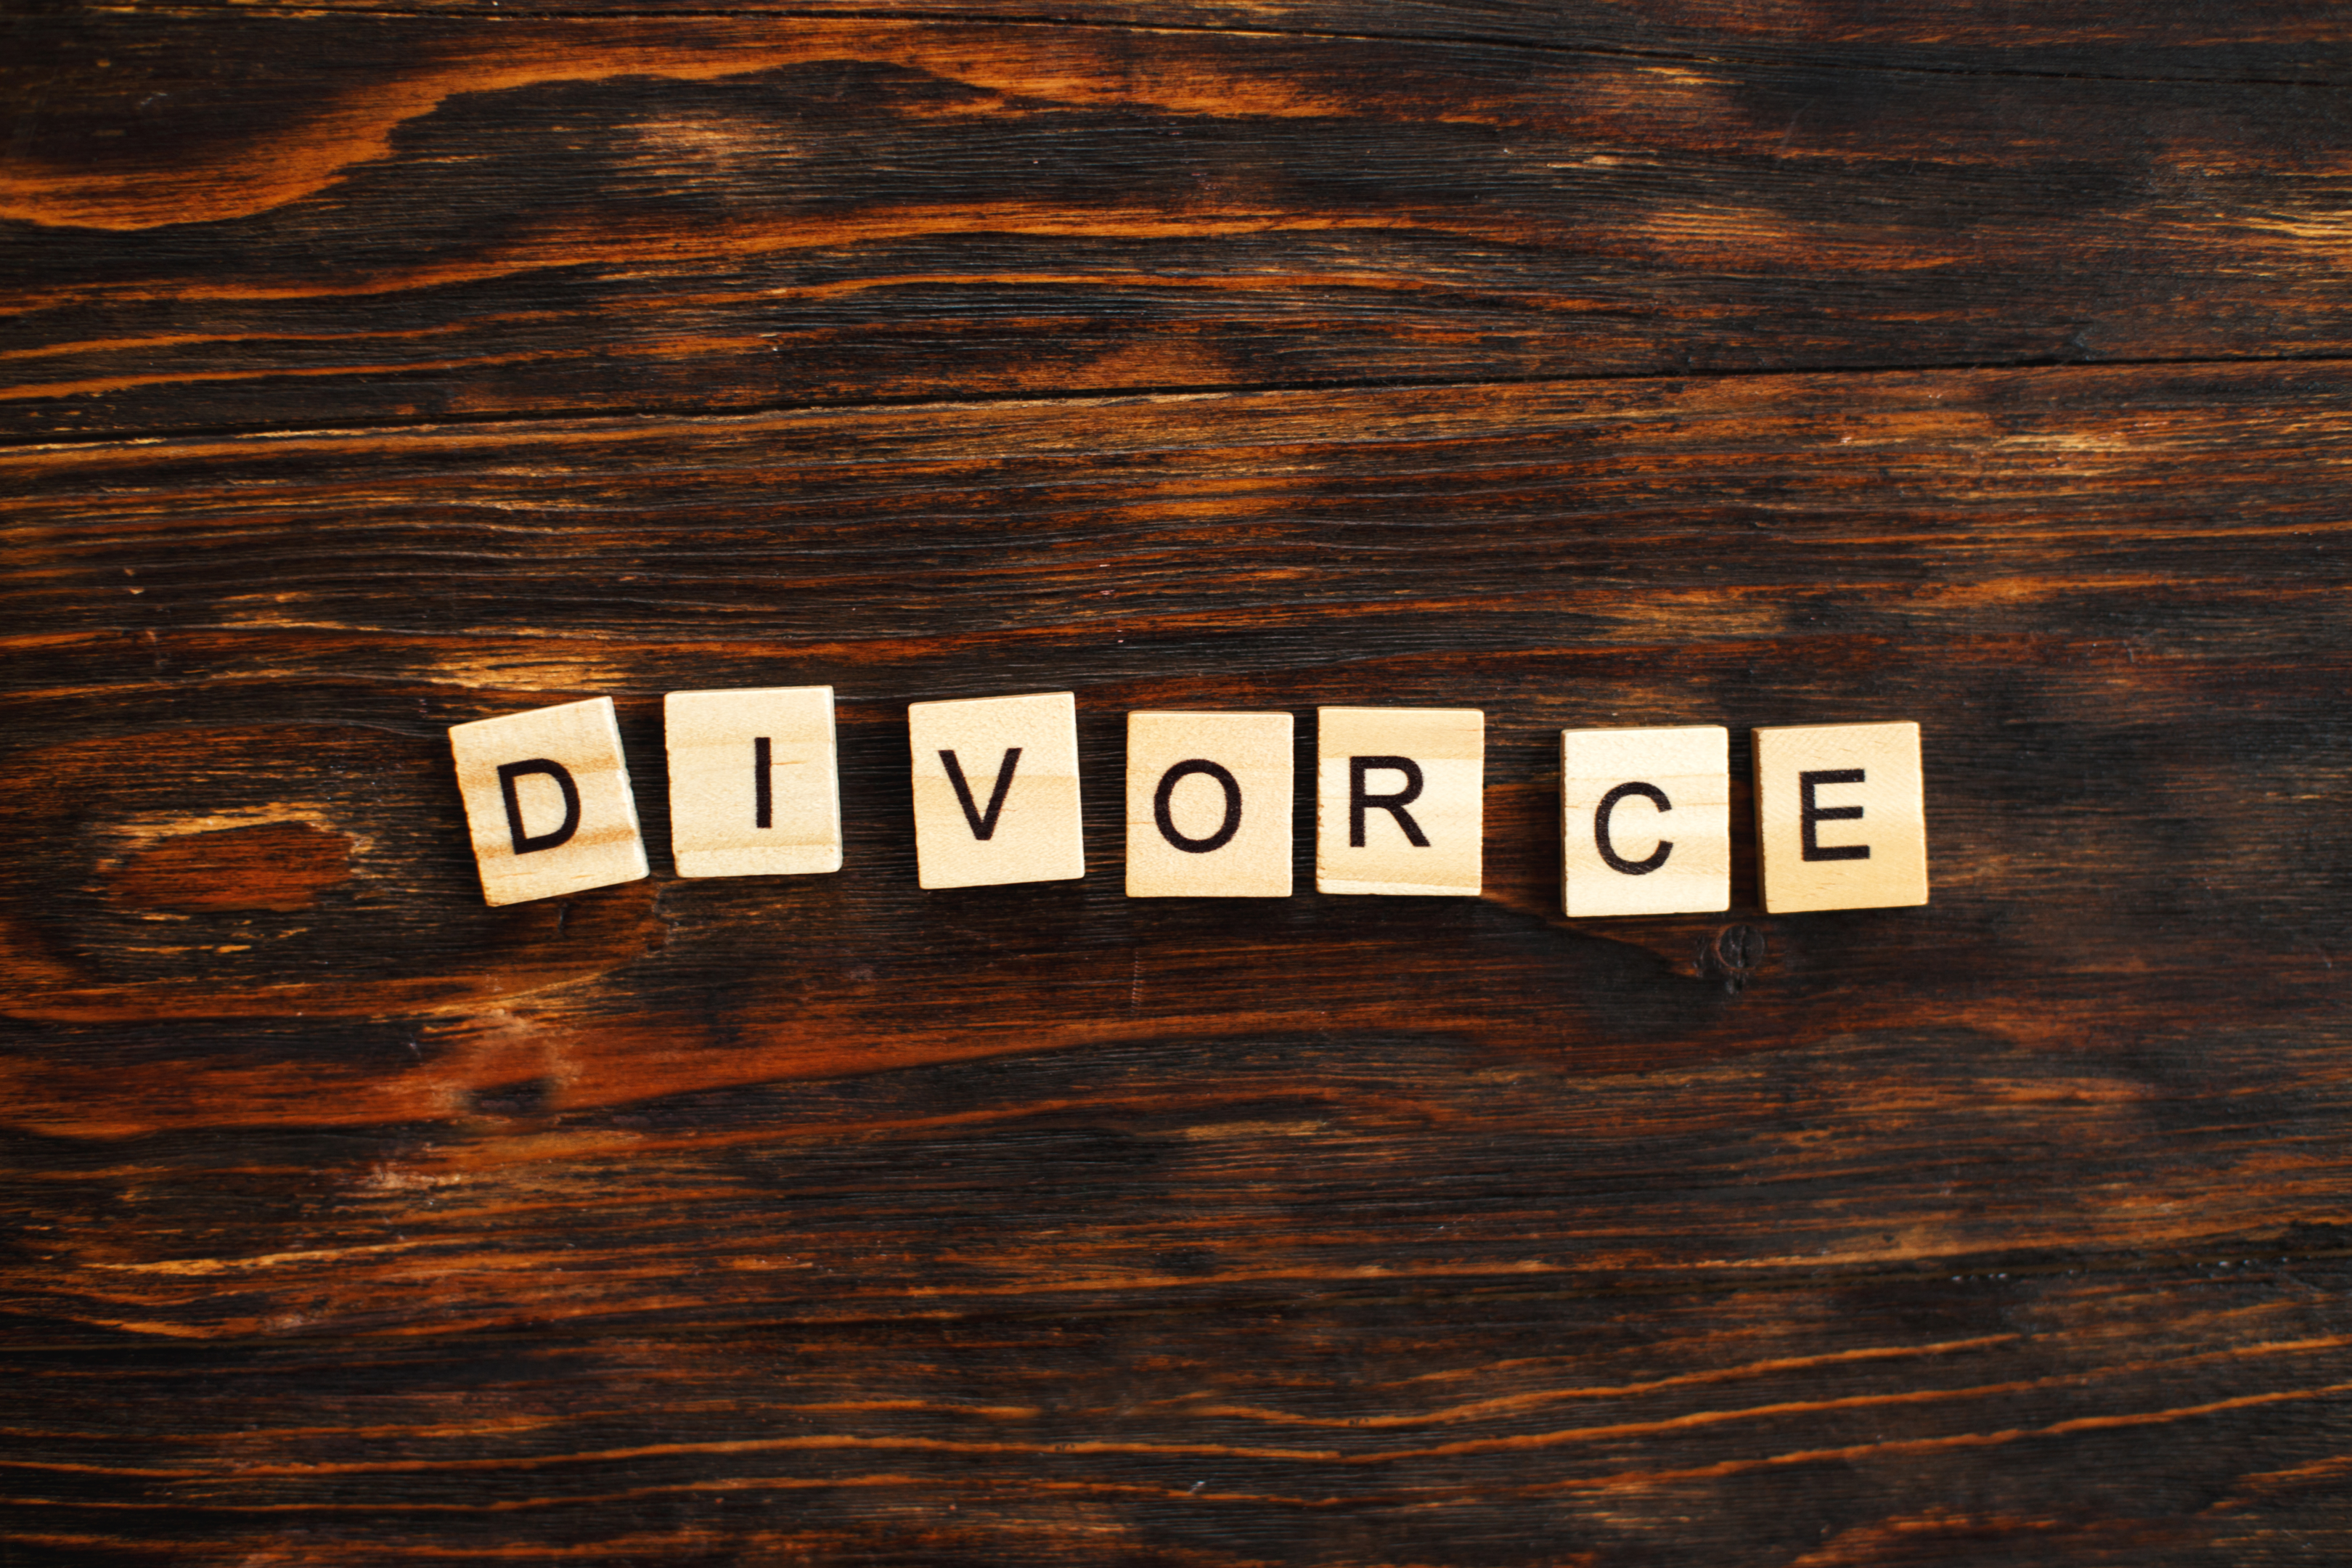 While marriage, legal separation, and divorce are all related to the state of a relationship, there are key differences between them. Understanding the implications of each can help couples make informed decisions about their future. Whether it's seeking a judgement of legal separation or proceeding with a divorce, consulting with a qualified family law attorney can provide the guidance and support necessary to navigate these complex processes